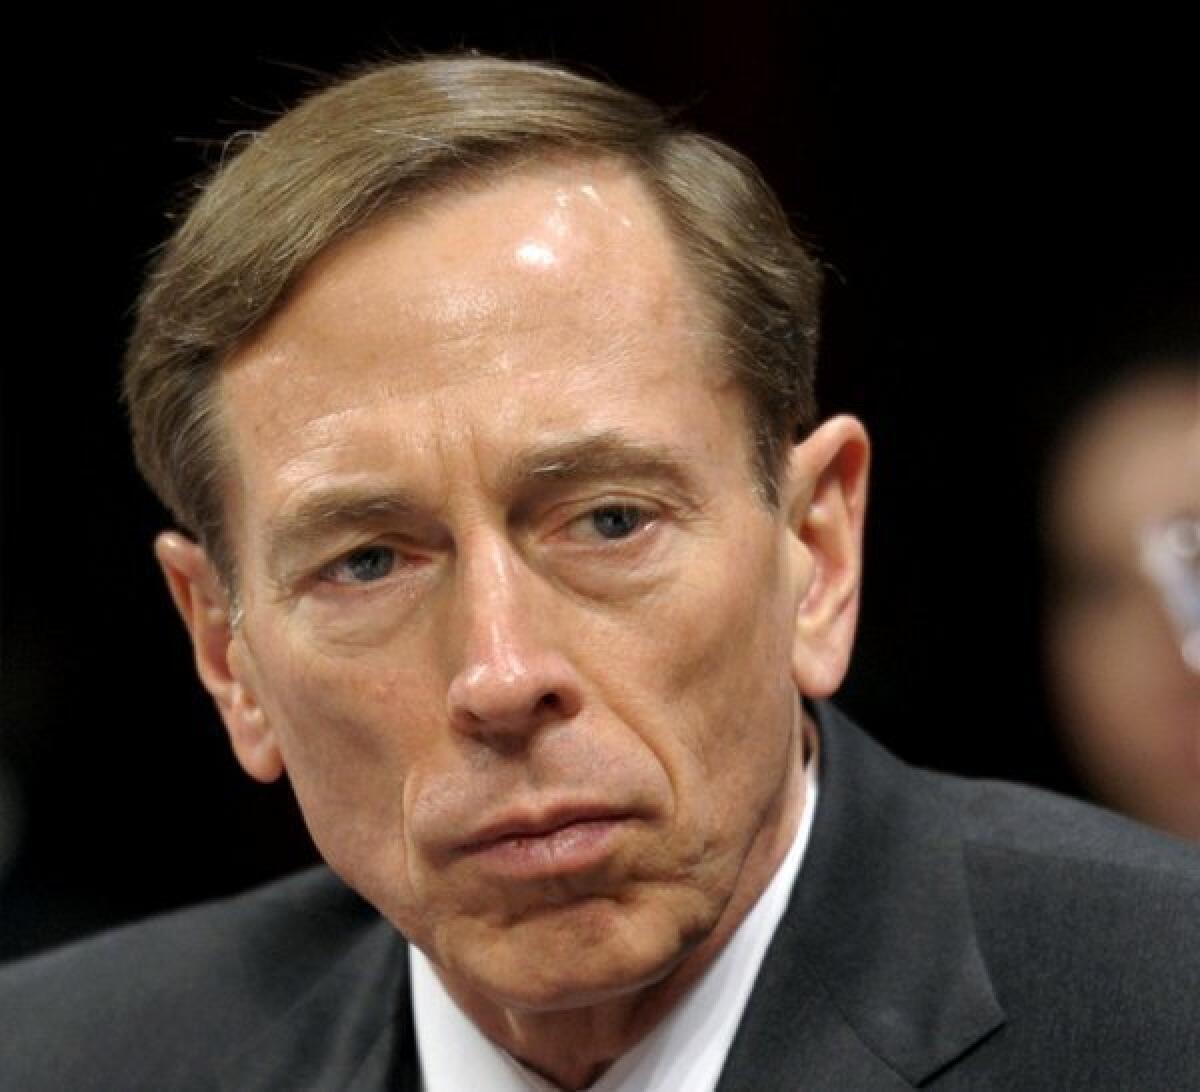 The FBI accessed David Petraeus' emails. How safe are our emails?